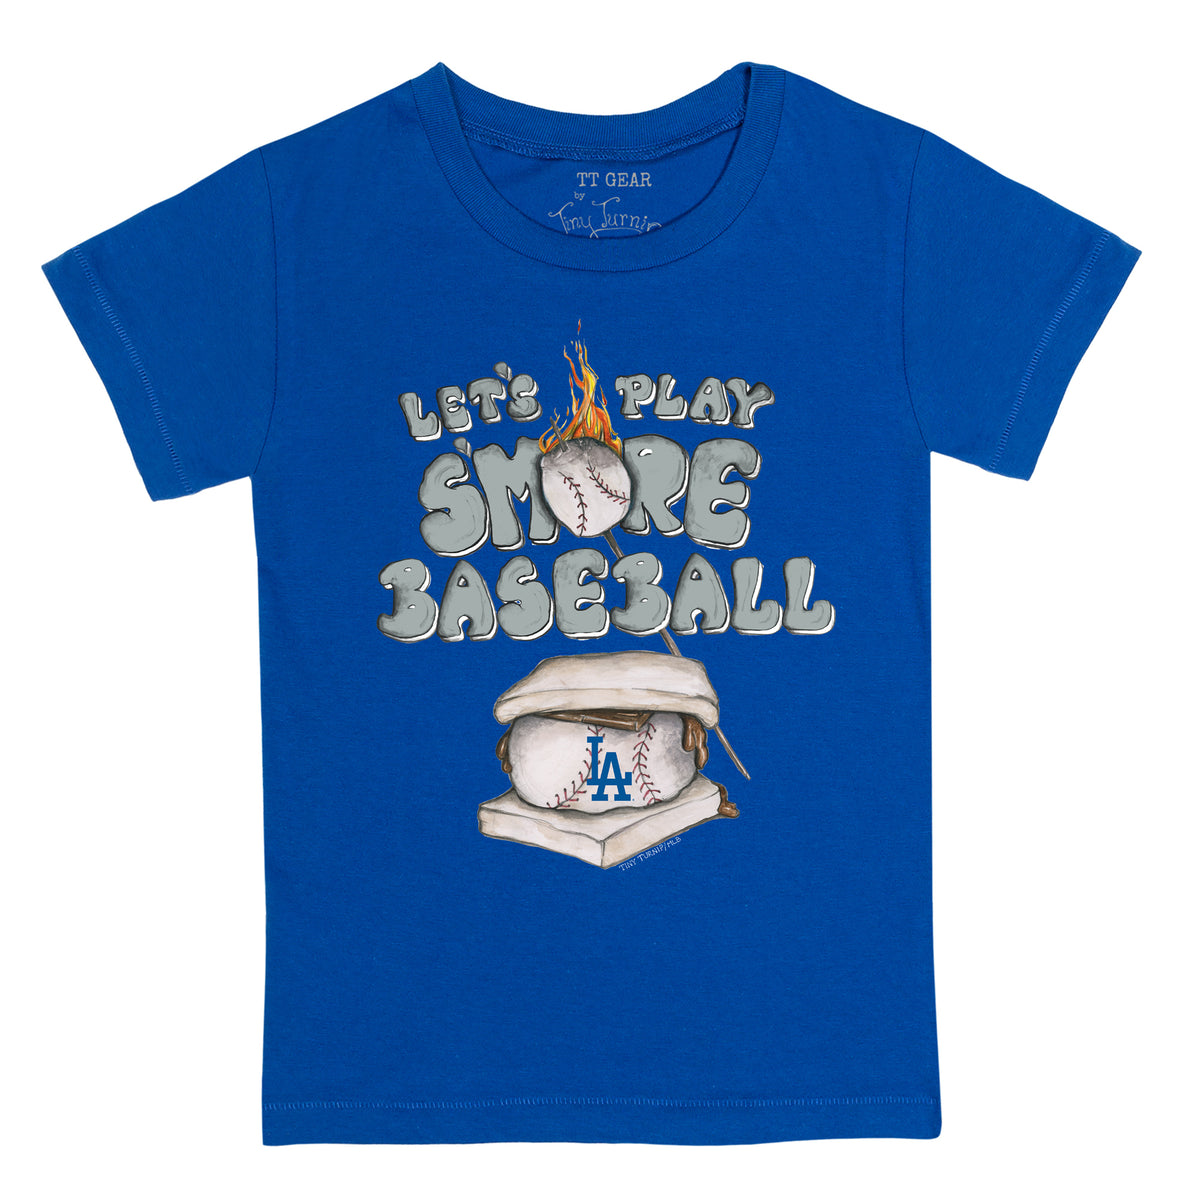 Los Angeles Dodgers S'mores Tee Shirt 4T / Royal Blue